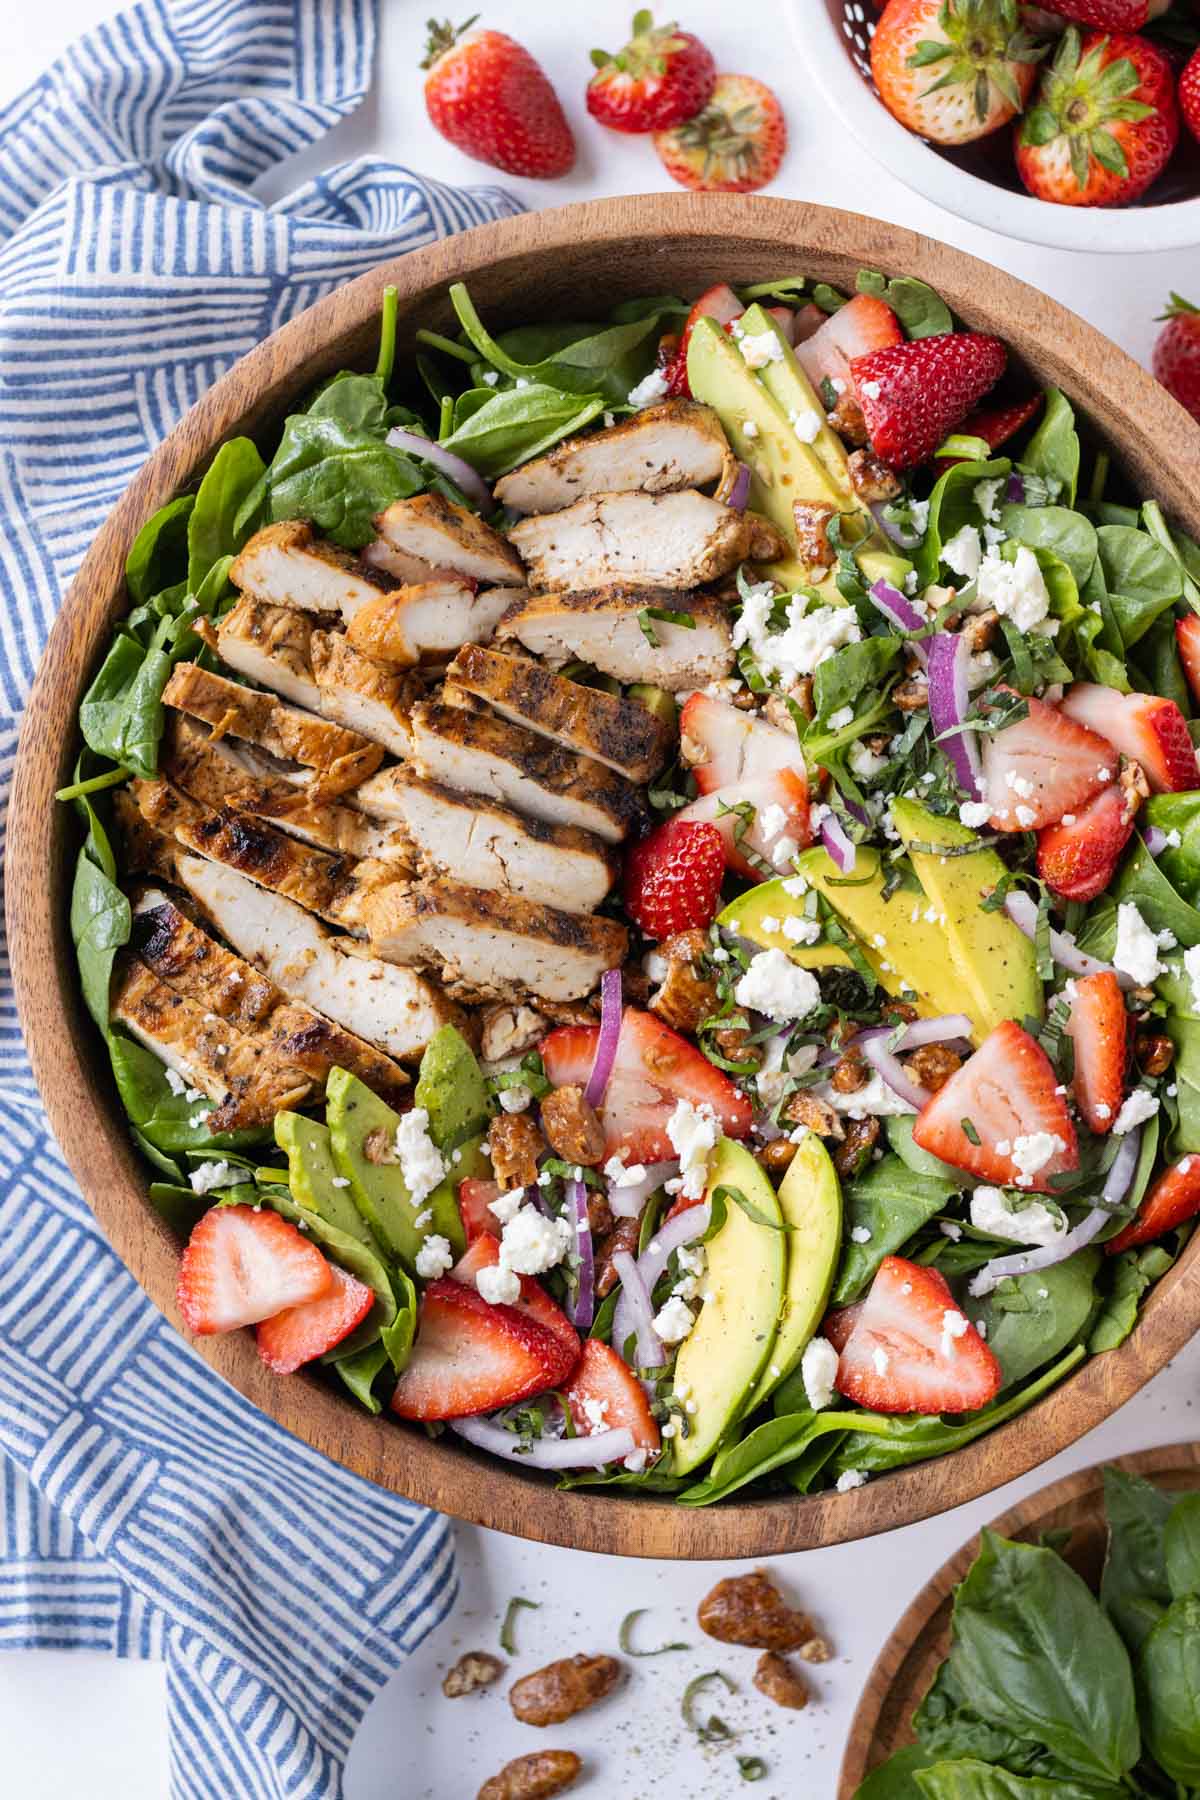 Grilled chicken is added on top of a spinach salad with strawberries and a balsamic vinaigrette.